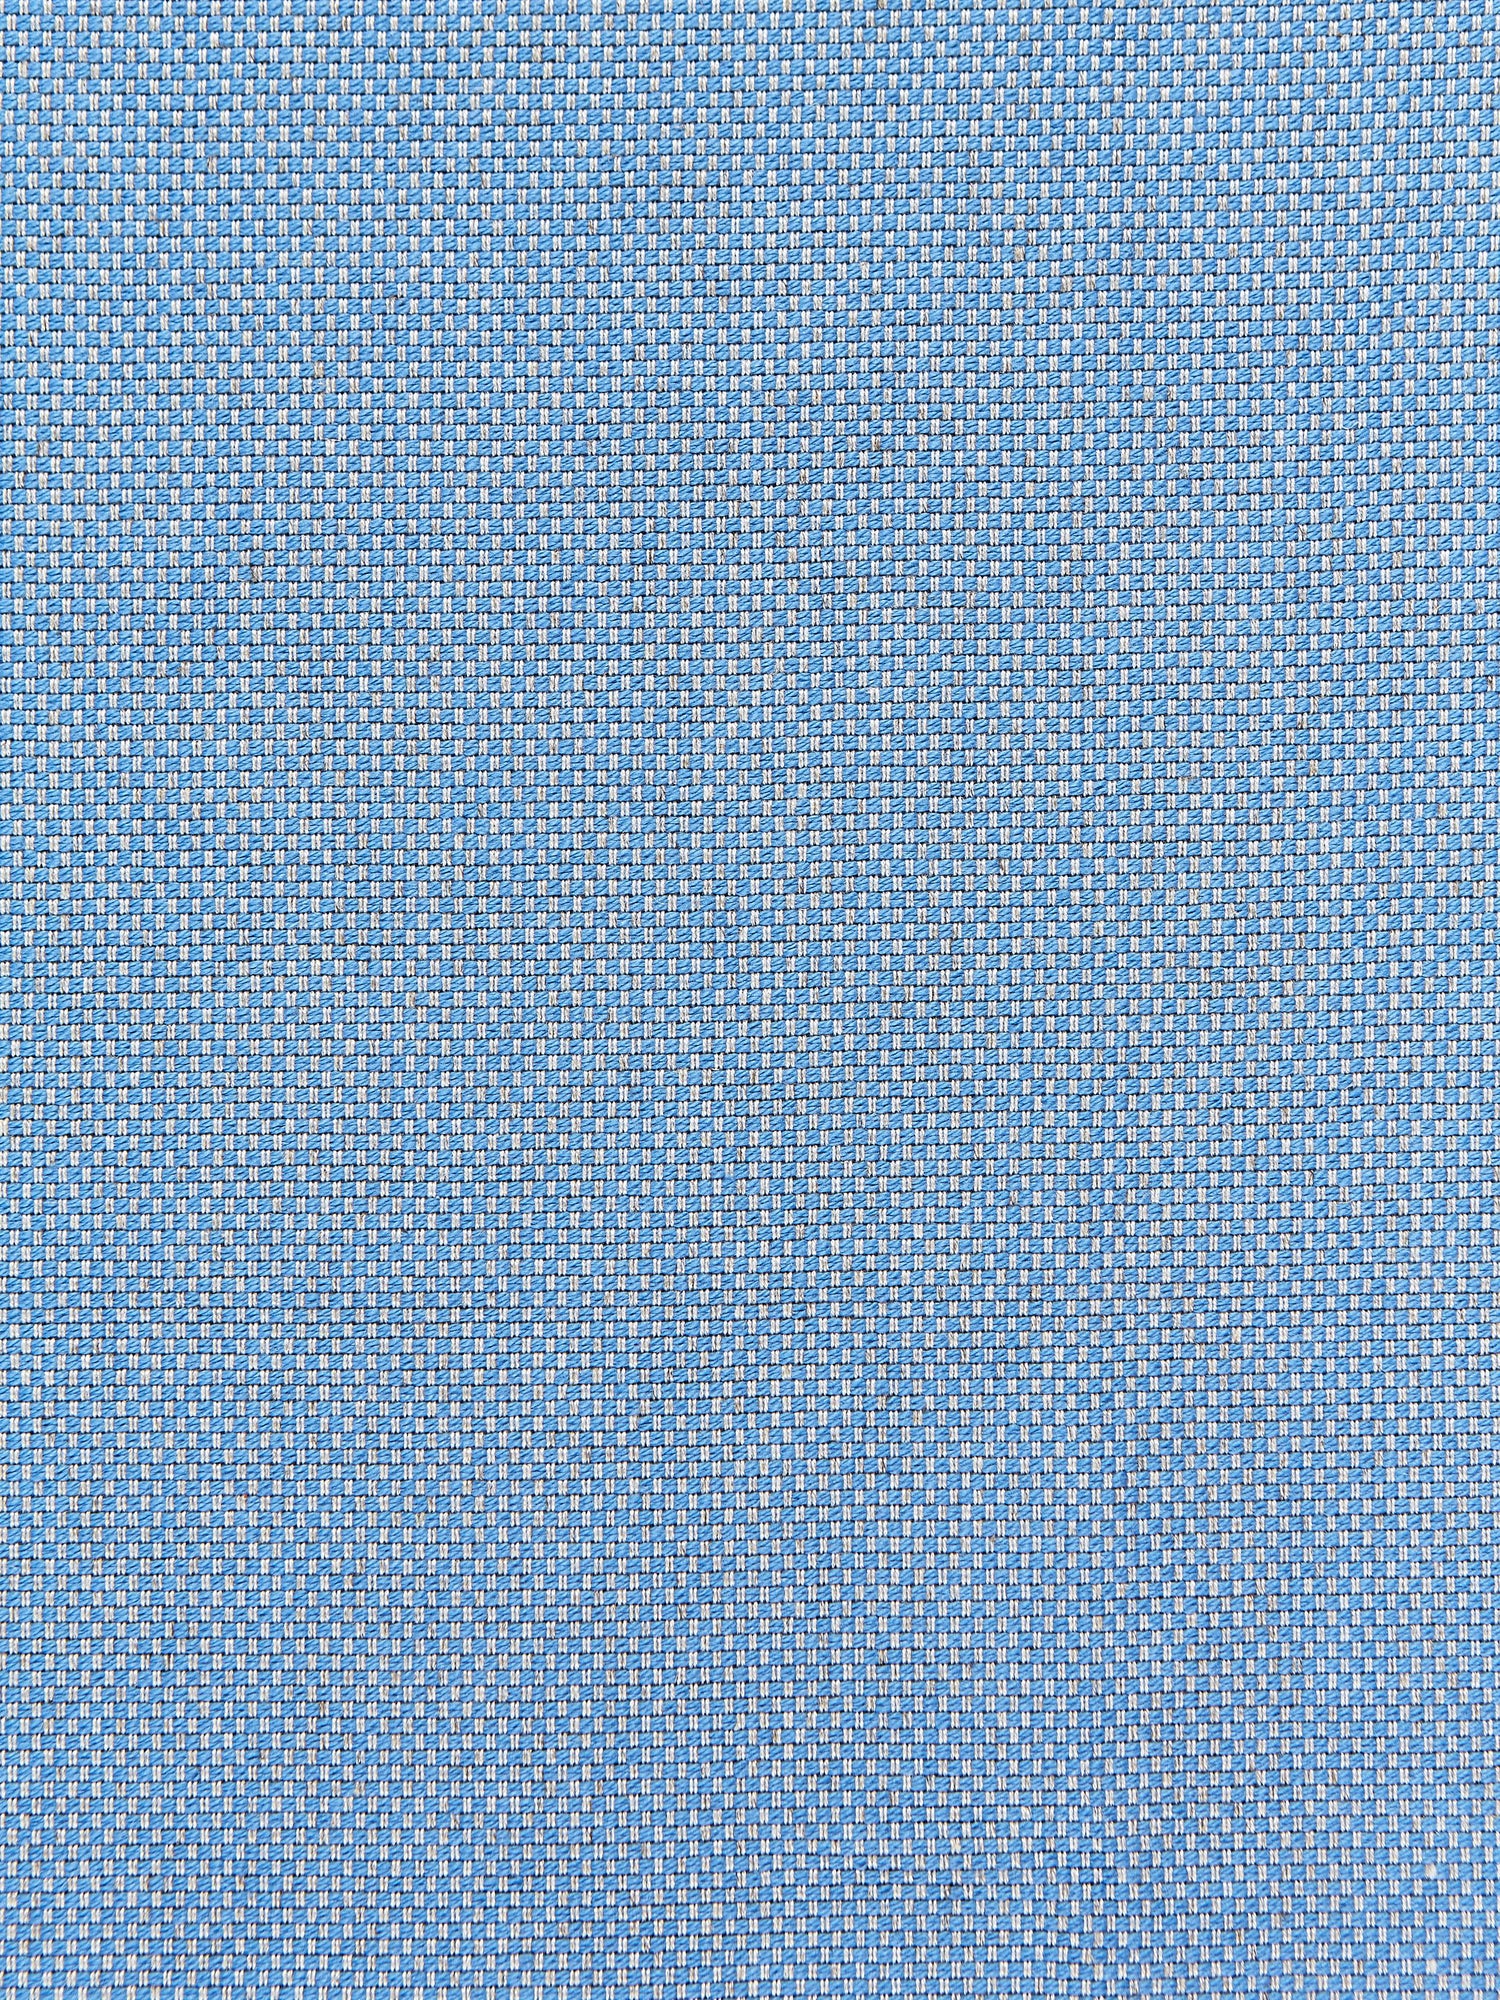 Prato Weave fabric in sky color - pattern number SC 000336393 - by Scalamandre in the Scalamandre Fabrics Book 1 collection